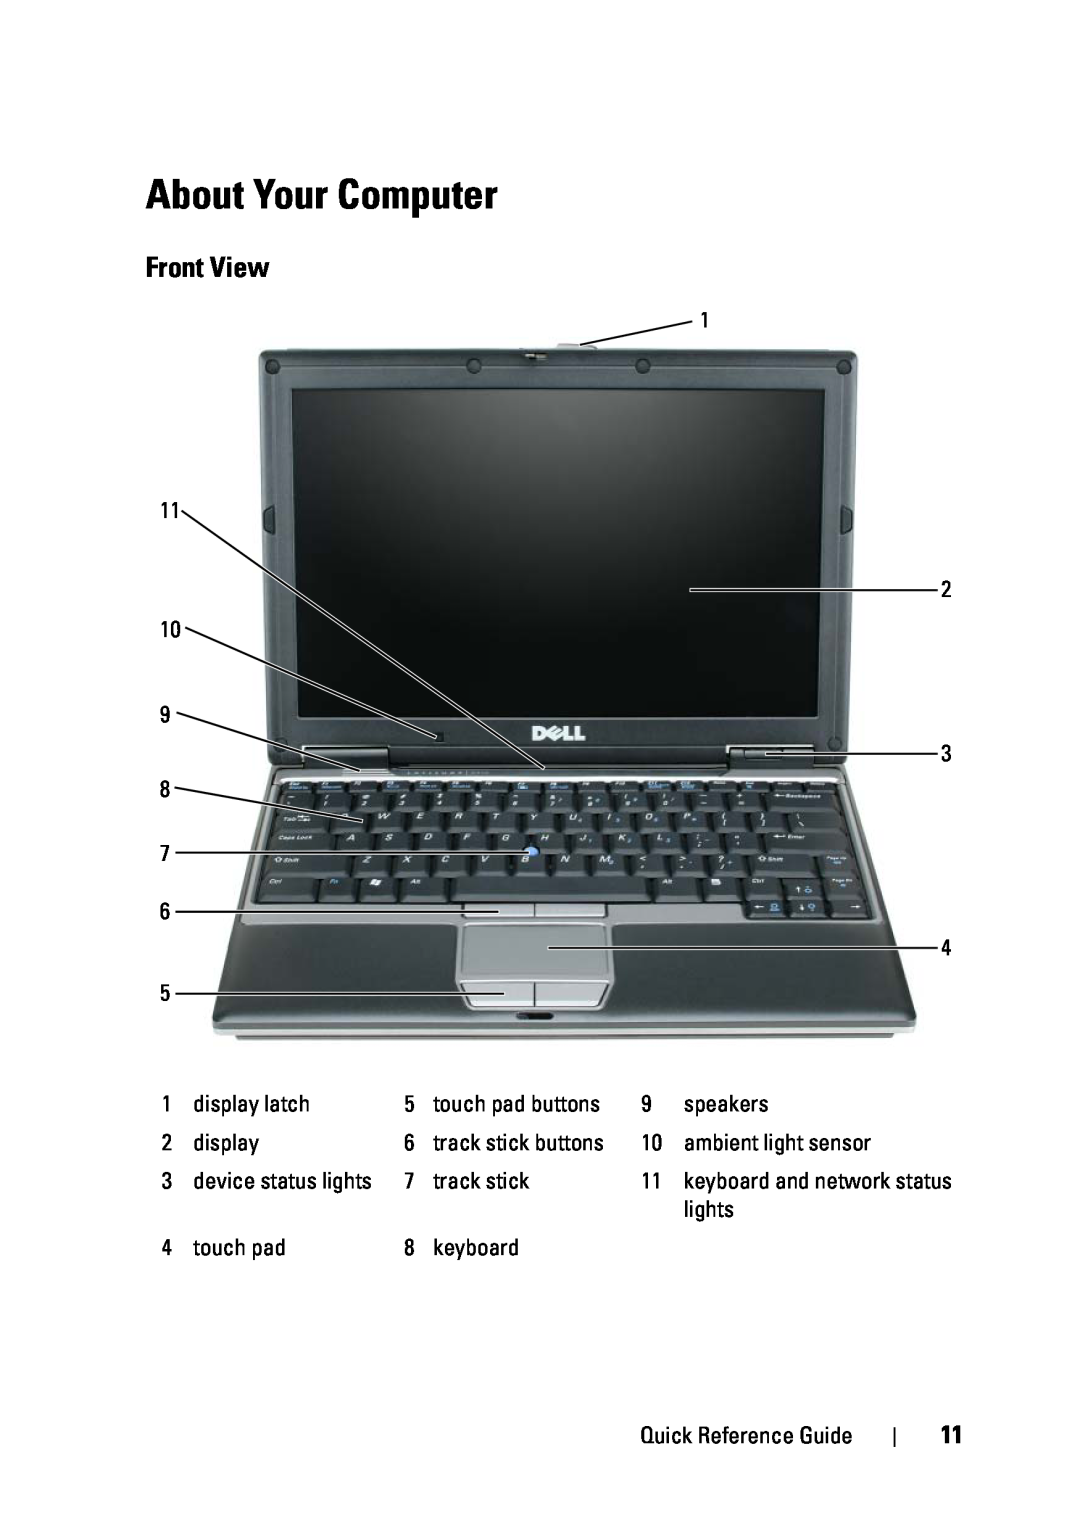 Dell D430 manual About Your Computer, Front View 